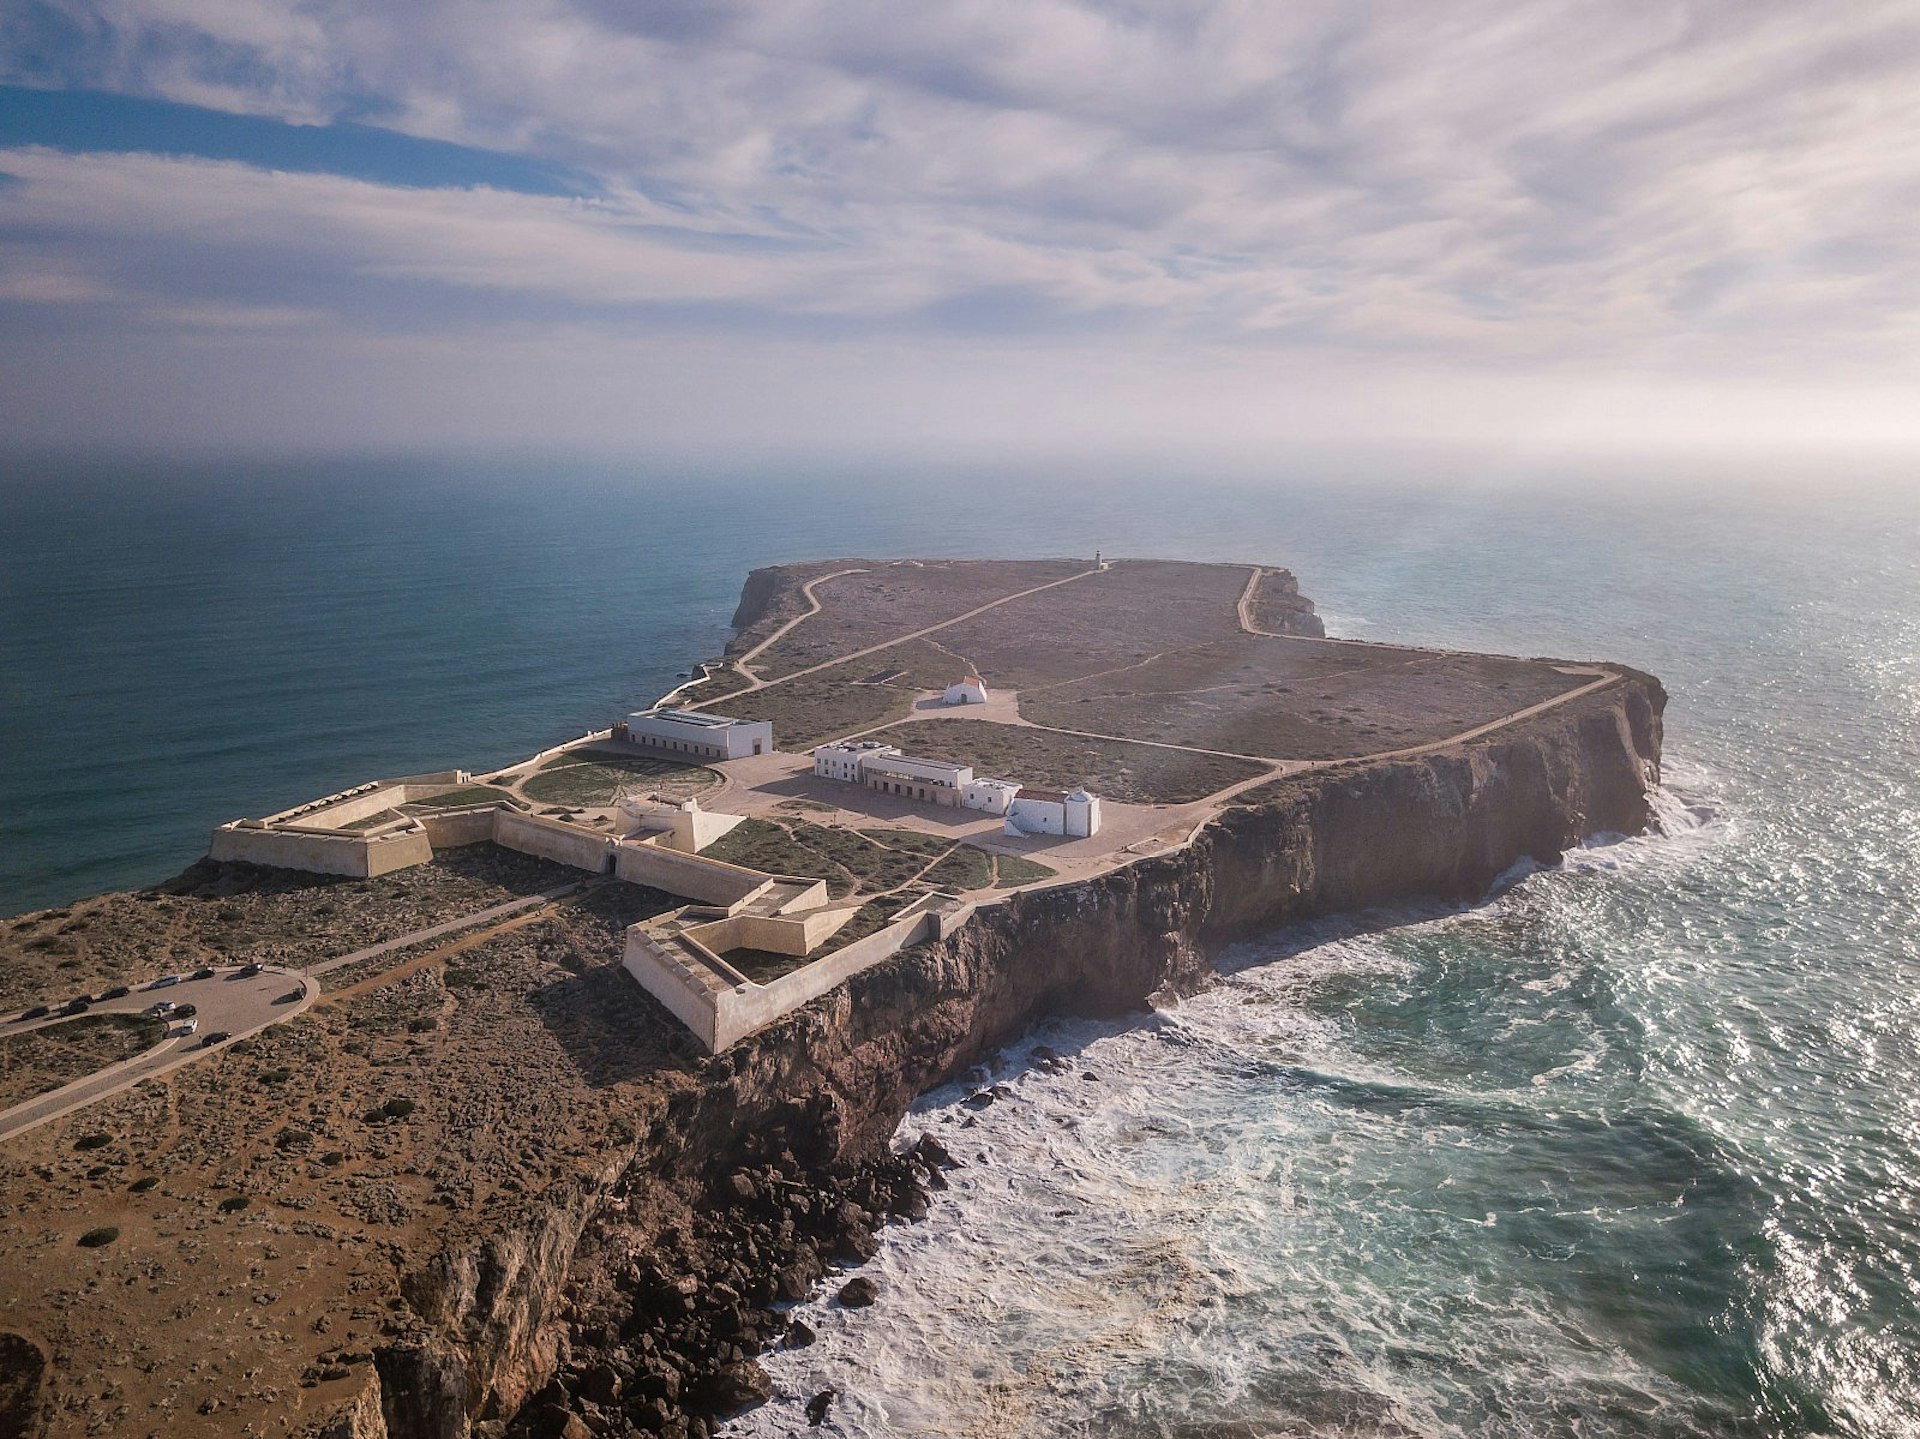 An aerial view over a fortress in a dramatic location at the end of a promontory; heavy waves crash against the cliffs below. 